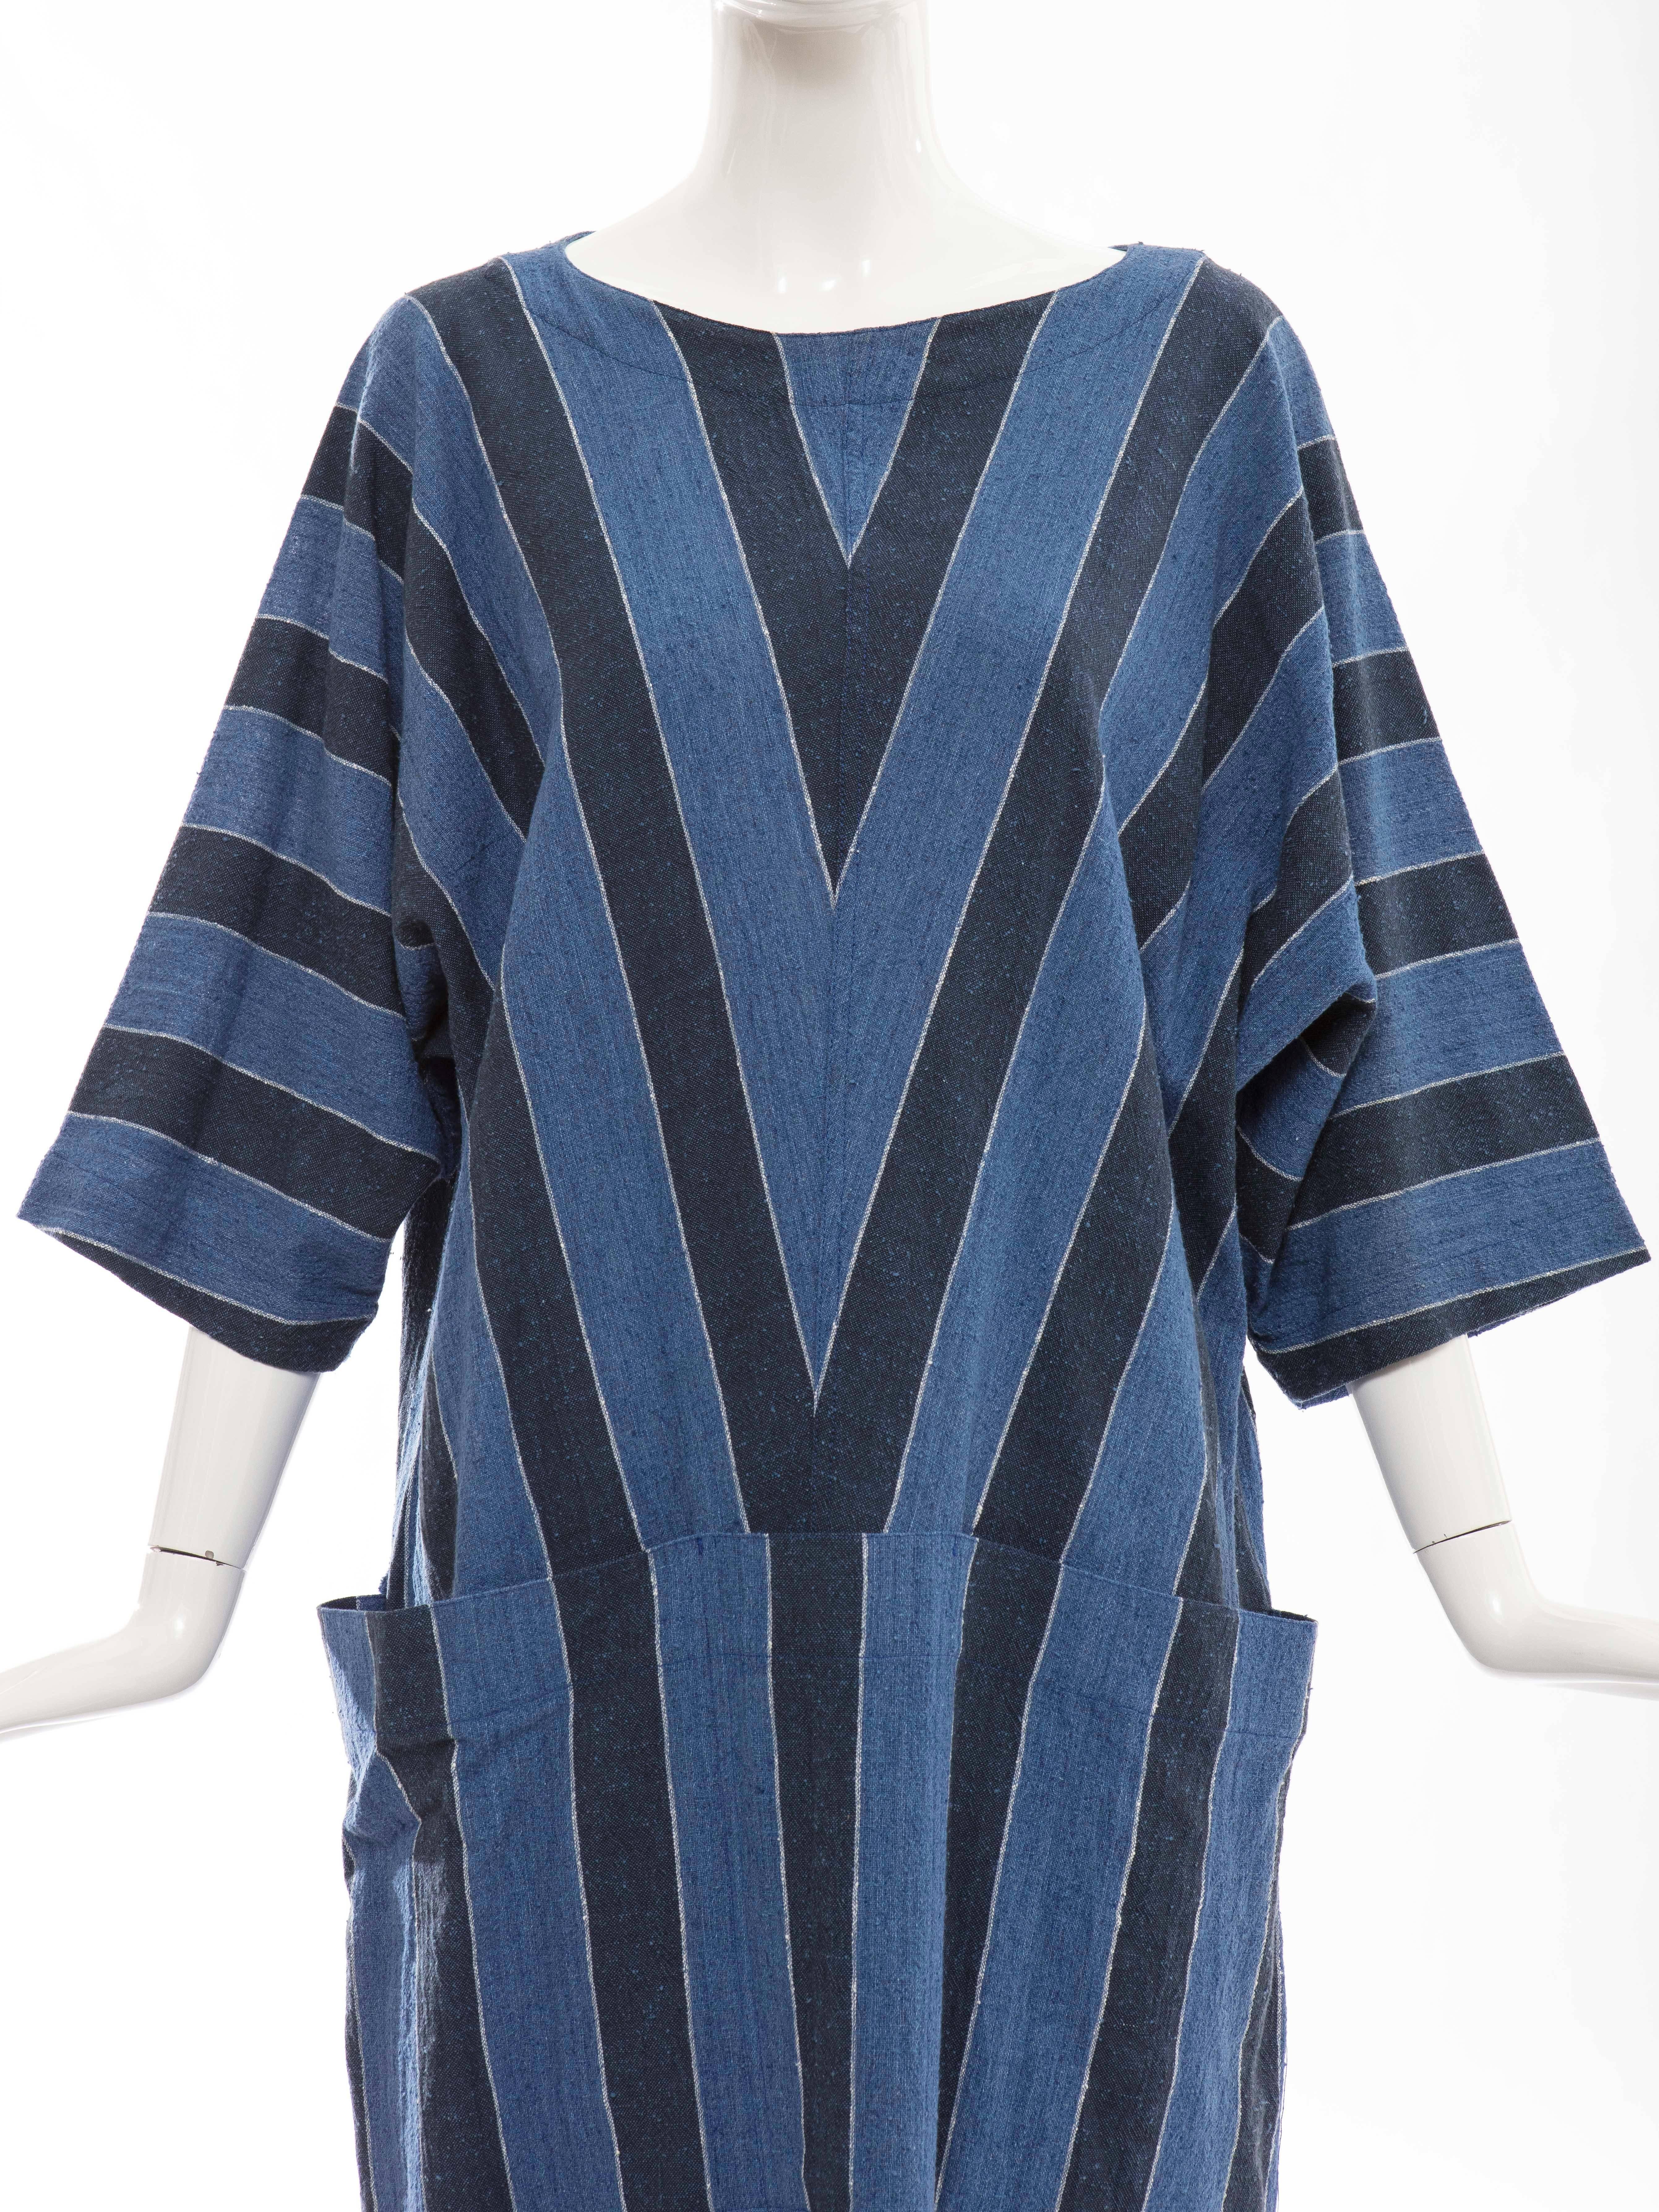 Blue Issey Miyake Plantation Woven Cotton Dress, Circa: 1980's For Sale